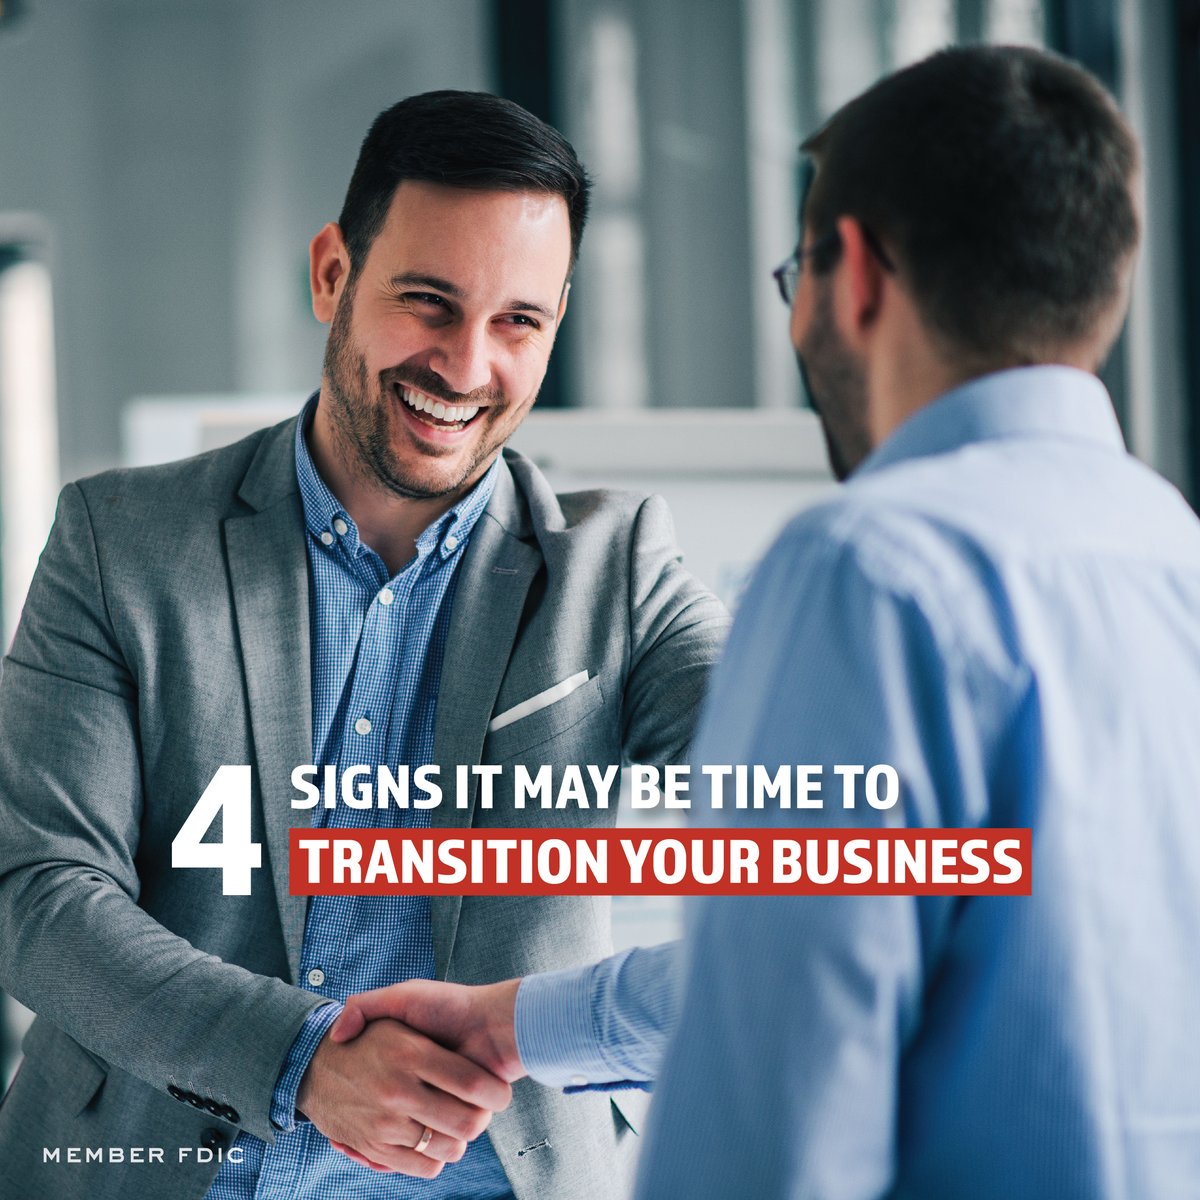 At some point in its lifetime, every business will experience a transition, such as a transfer to new ownership. George Myers, Sr Business Development Officer, explains the signs you should look for to know when your business is ready for change: bit.ly/4cMFLzn